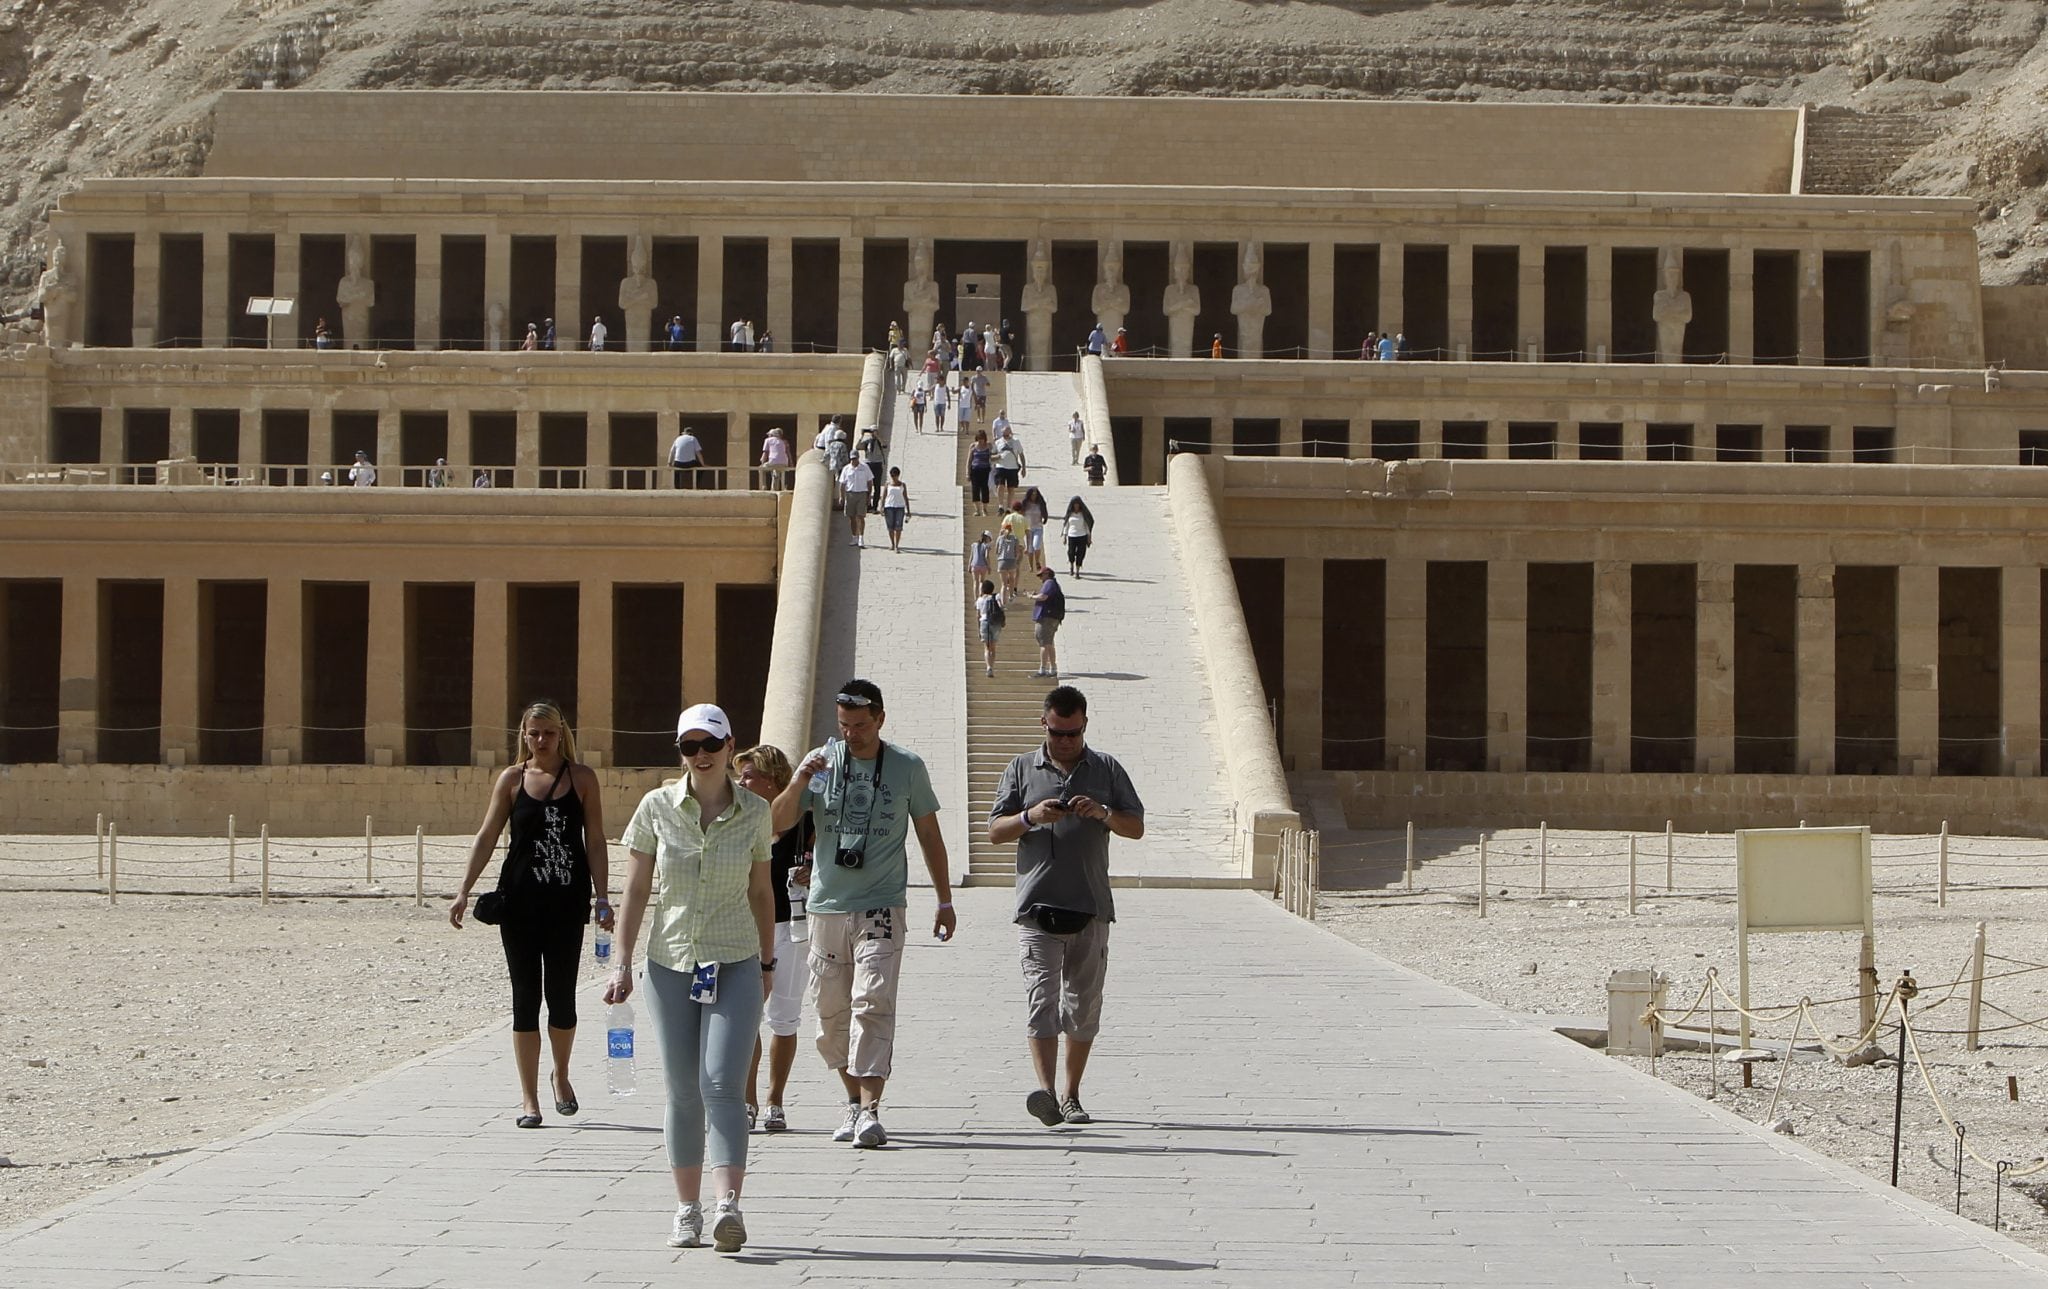 Tourists walk along the main corridor of the Temple of Hatshepsut, a day after a hot air balloon crash left 19 foreigners dead, in Luxor, February 27, 2013. 